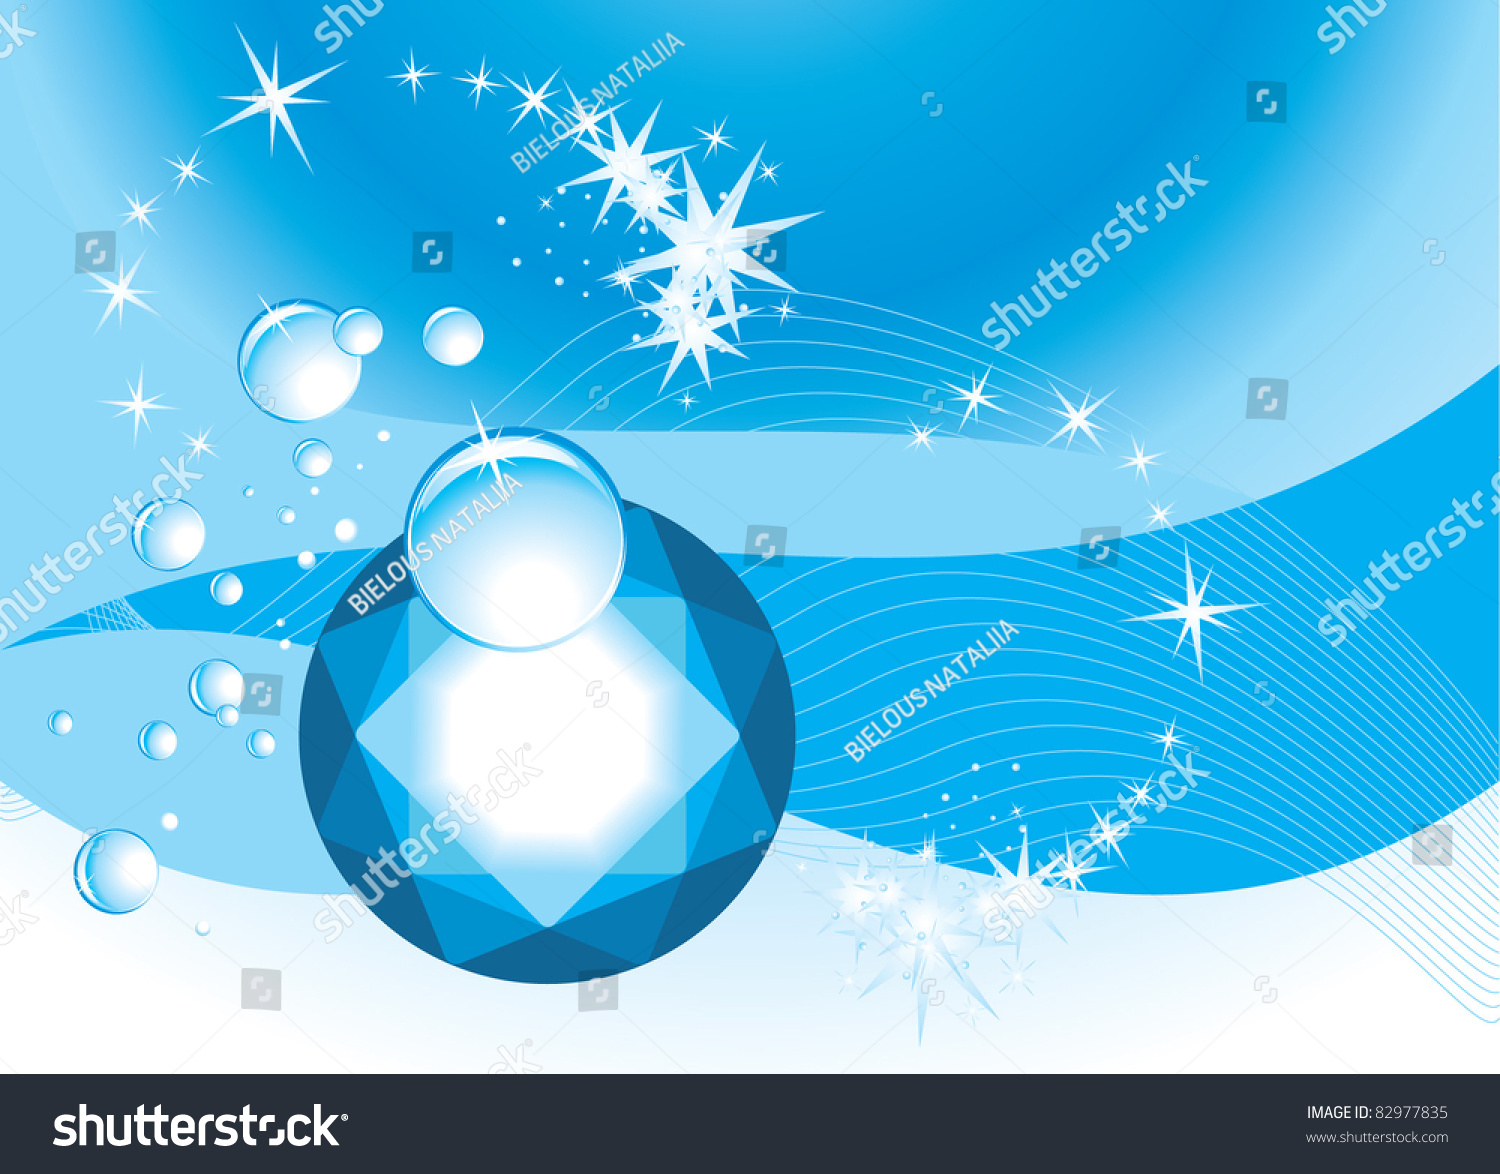 SVG of Topaz on the abstract blue background. Vector svg